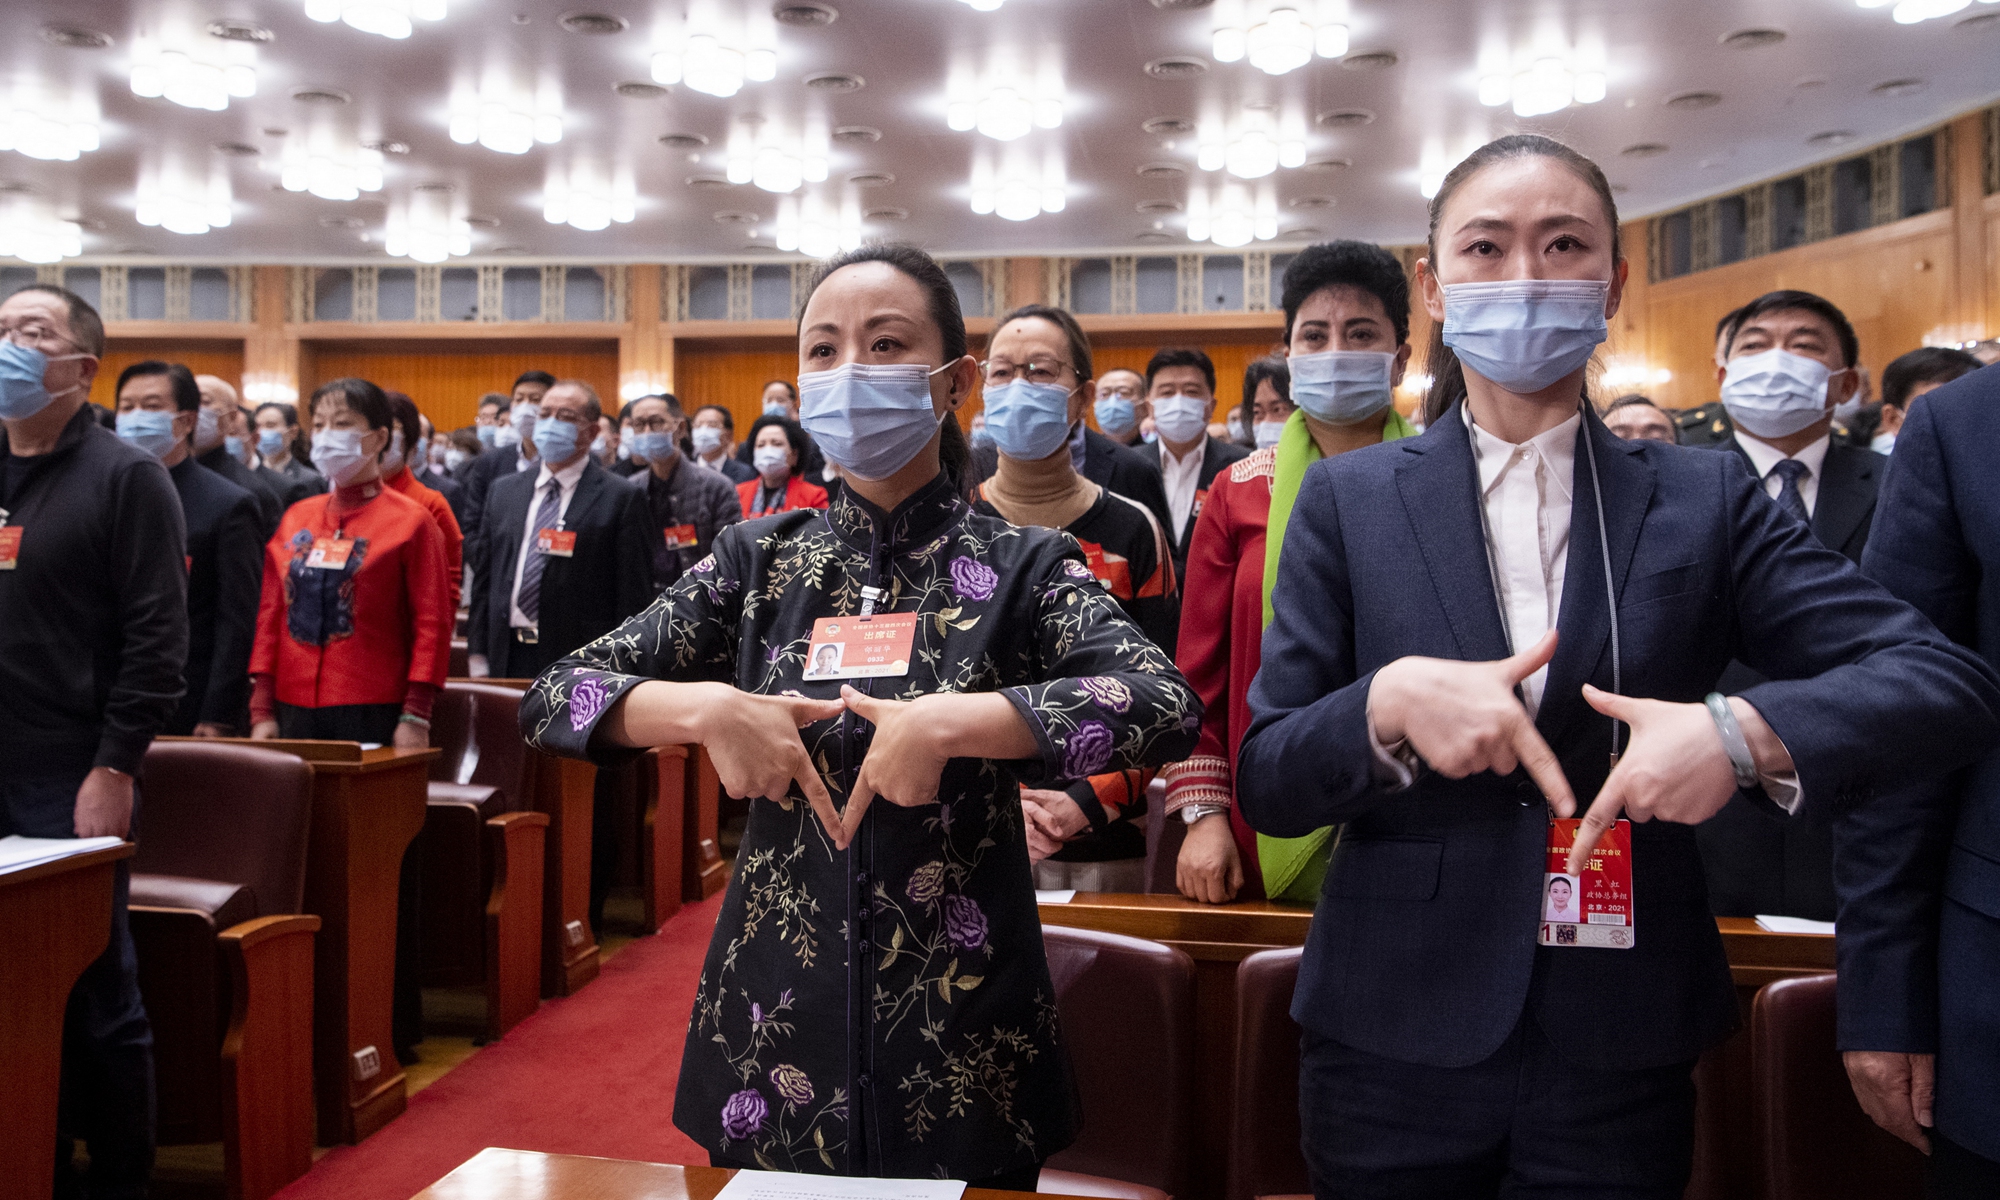 Tai Lihua (center), a member of the 13th National Committee of the Chinese People's Political Consultative Conference (CPPCC) and head of the China Disabled Persons' Art Troupe, and Hei Hong (right), sign language teacher and interpreter for the troupe, sign the national anthem on Wednesday when the fourth session of the 13th National Committee of the CPPCC closed at the Great Hall of the People in Beijing. Photo: VCG